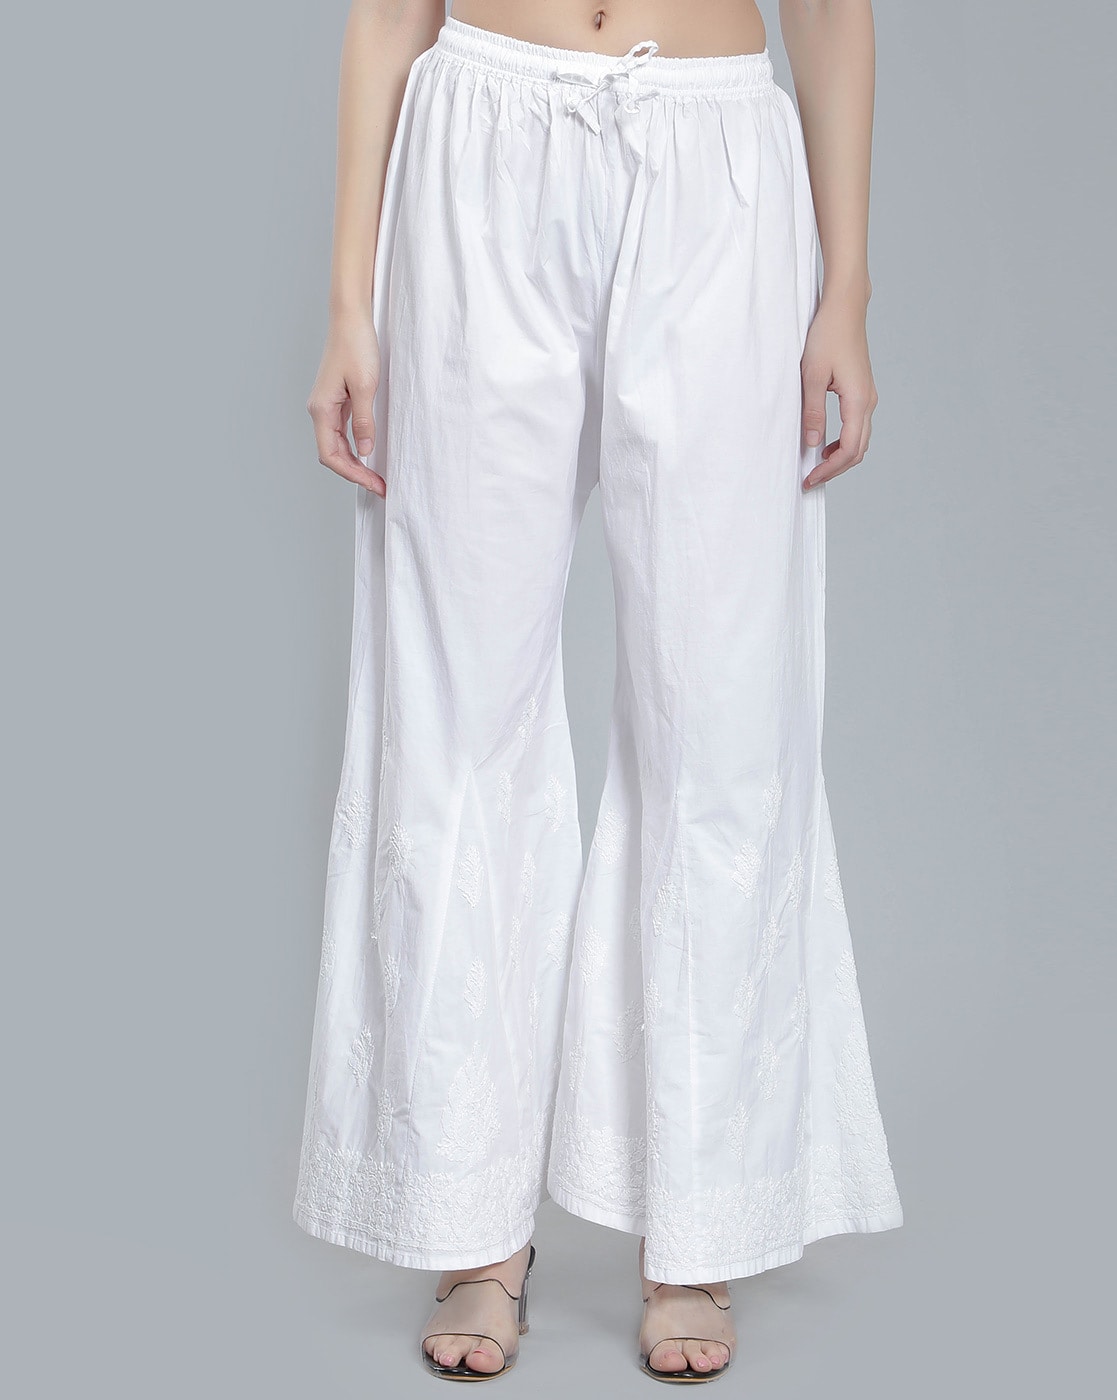 Women's Wide Leg Pants Solid Belted High Waist Cotton Linen Palazzo Pants  Casual Comfy Loung Pants for Beach Vacation(S,White) - Walmart.com